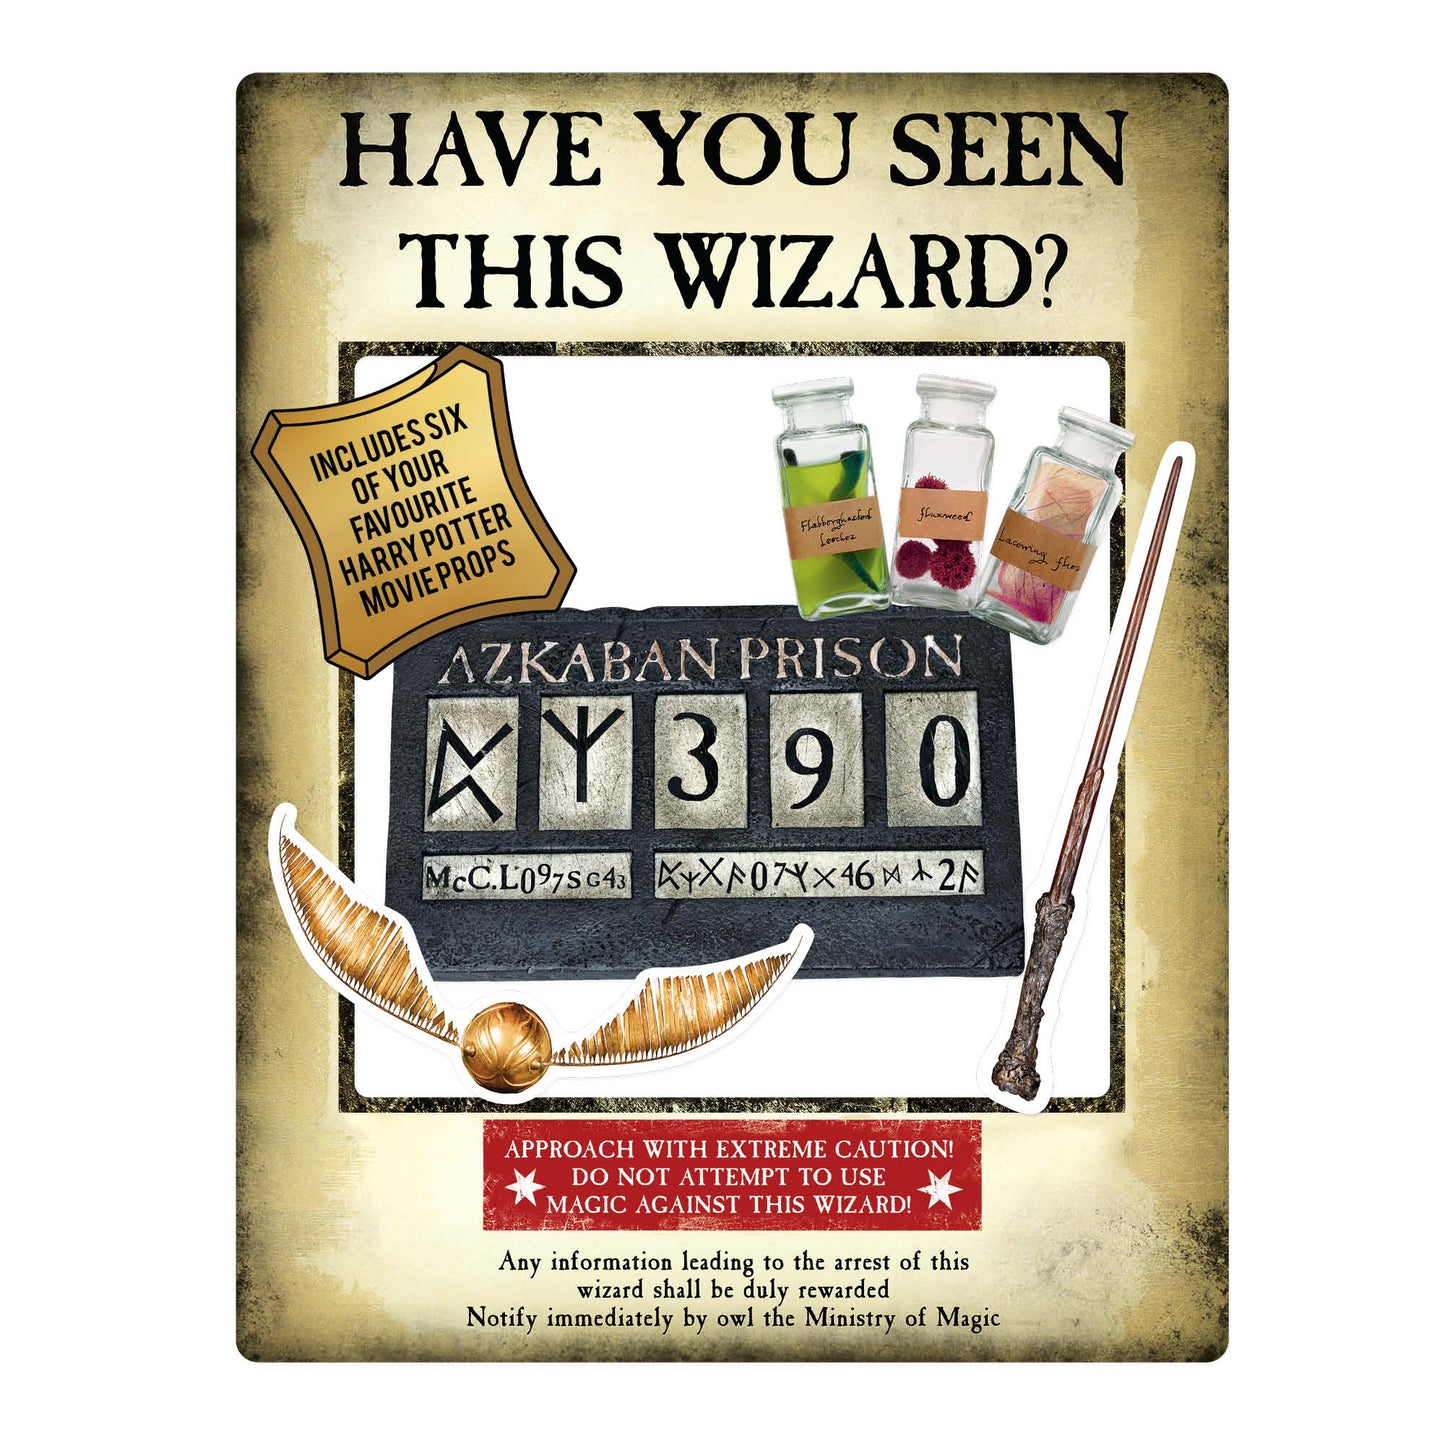 Harry Potter Wanted Poster Gold Selfie Frame Cardboard Cutout Have You Seen This Wizard?